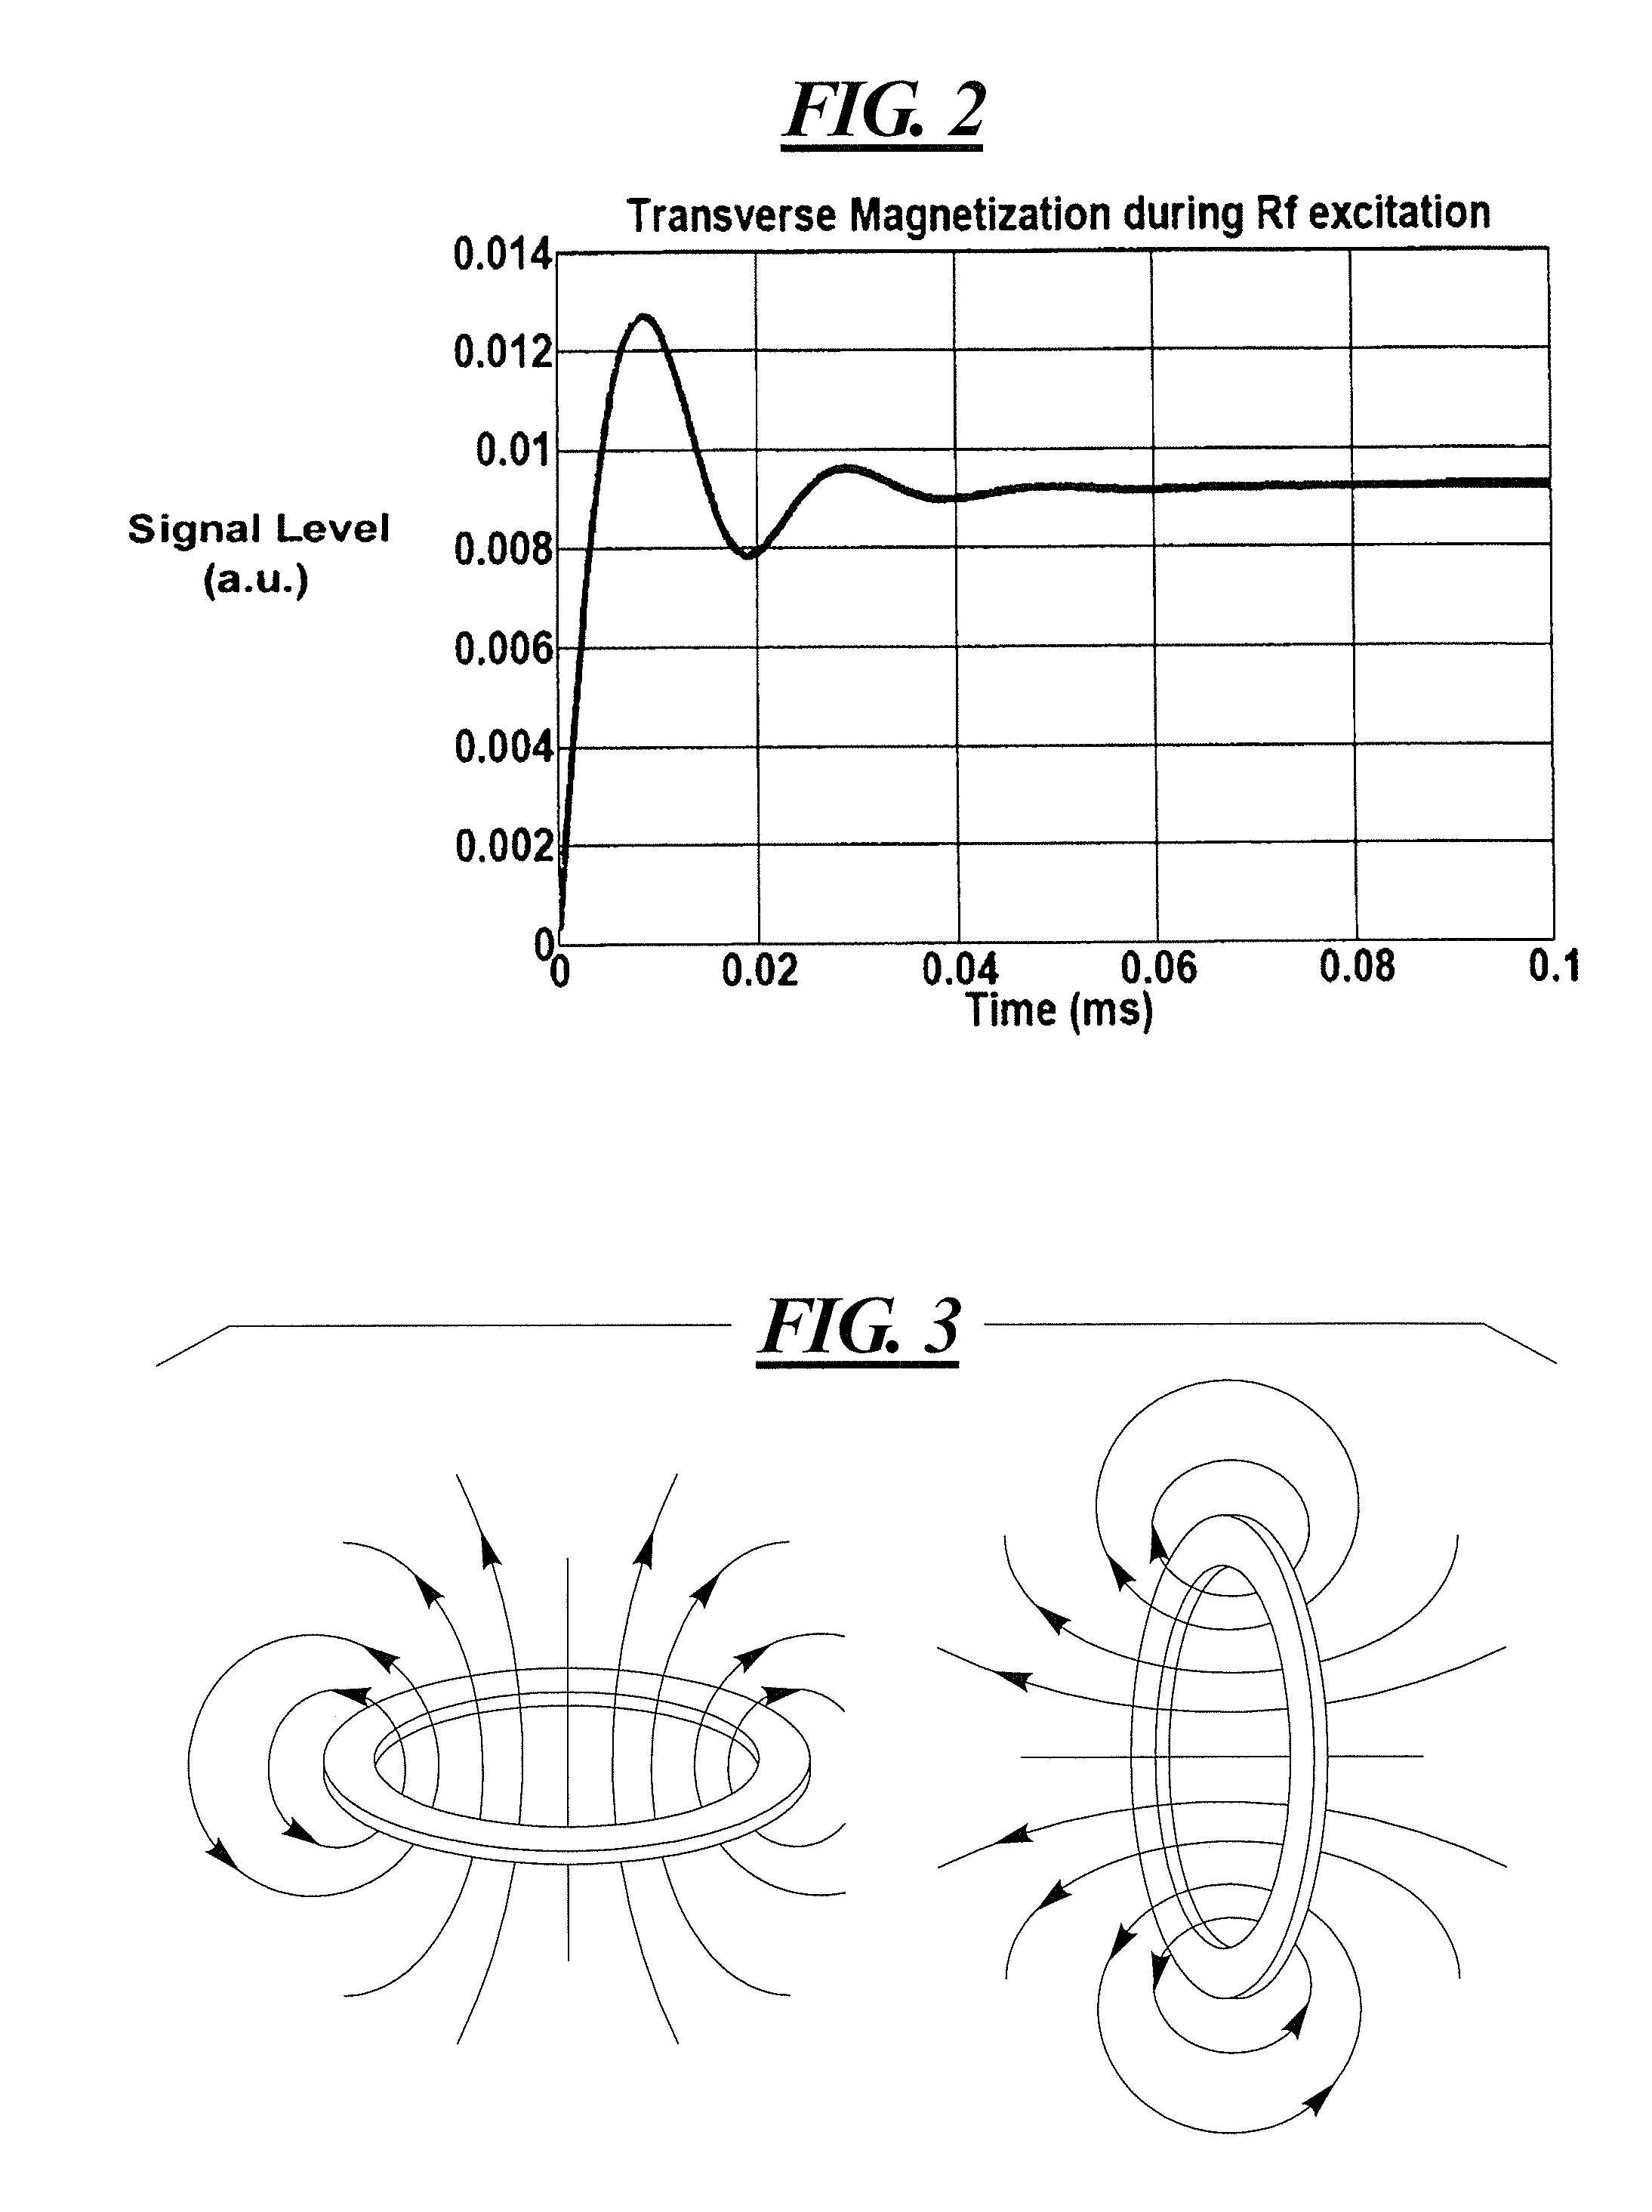 Magnetic resonance apparatus and data acquisition method with decoupling between transmit and receive coils